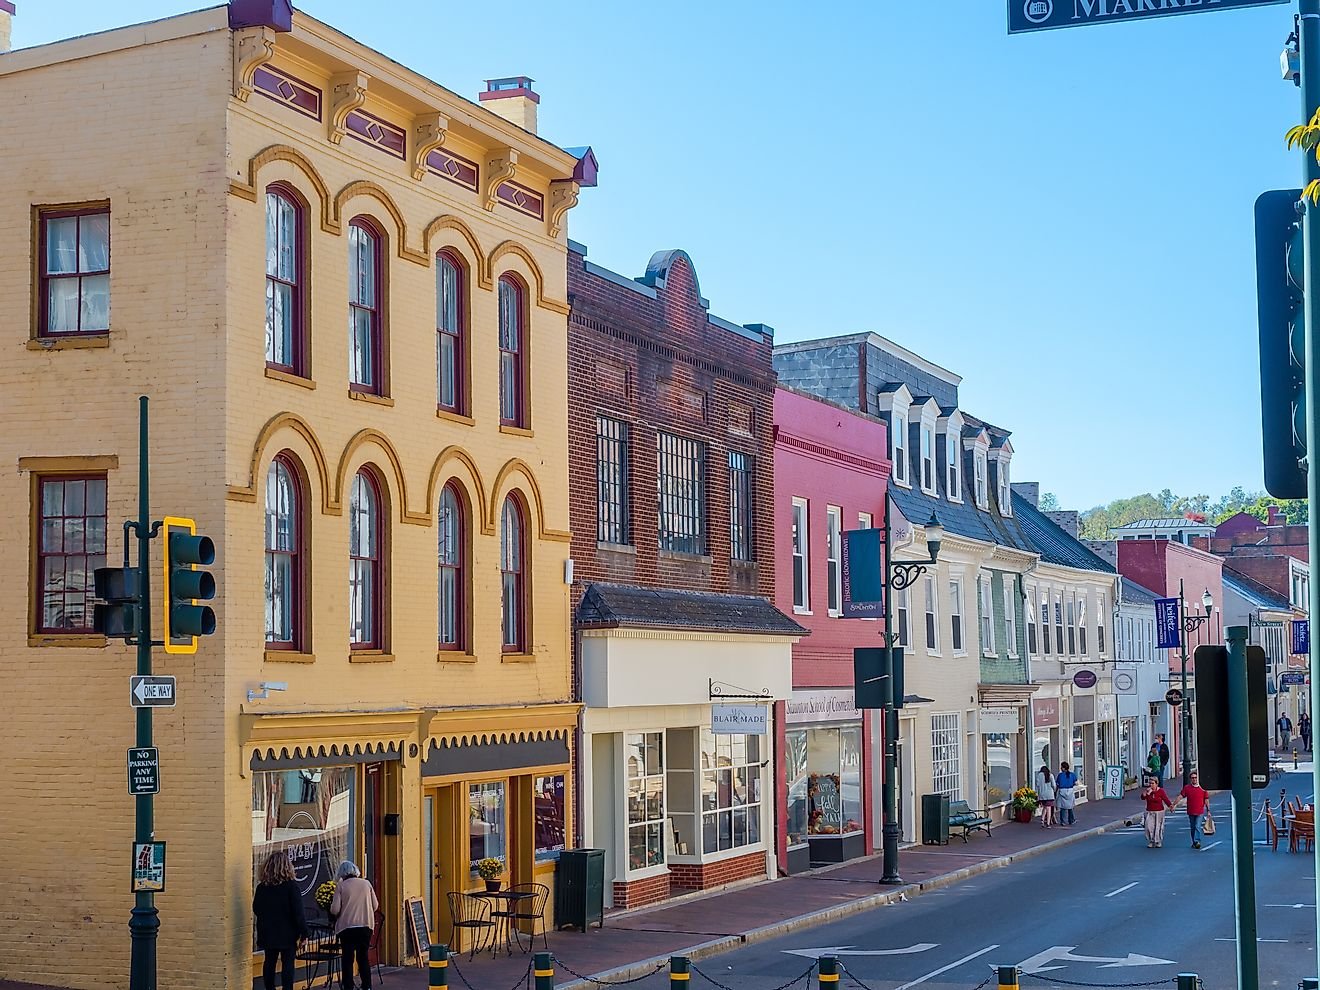 These Small Towns in Virginia That Come Alive In The Fall